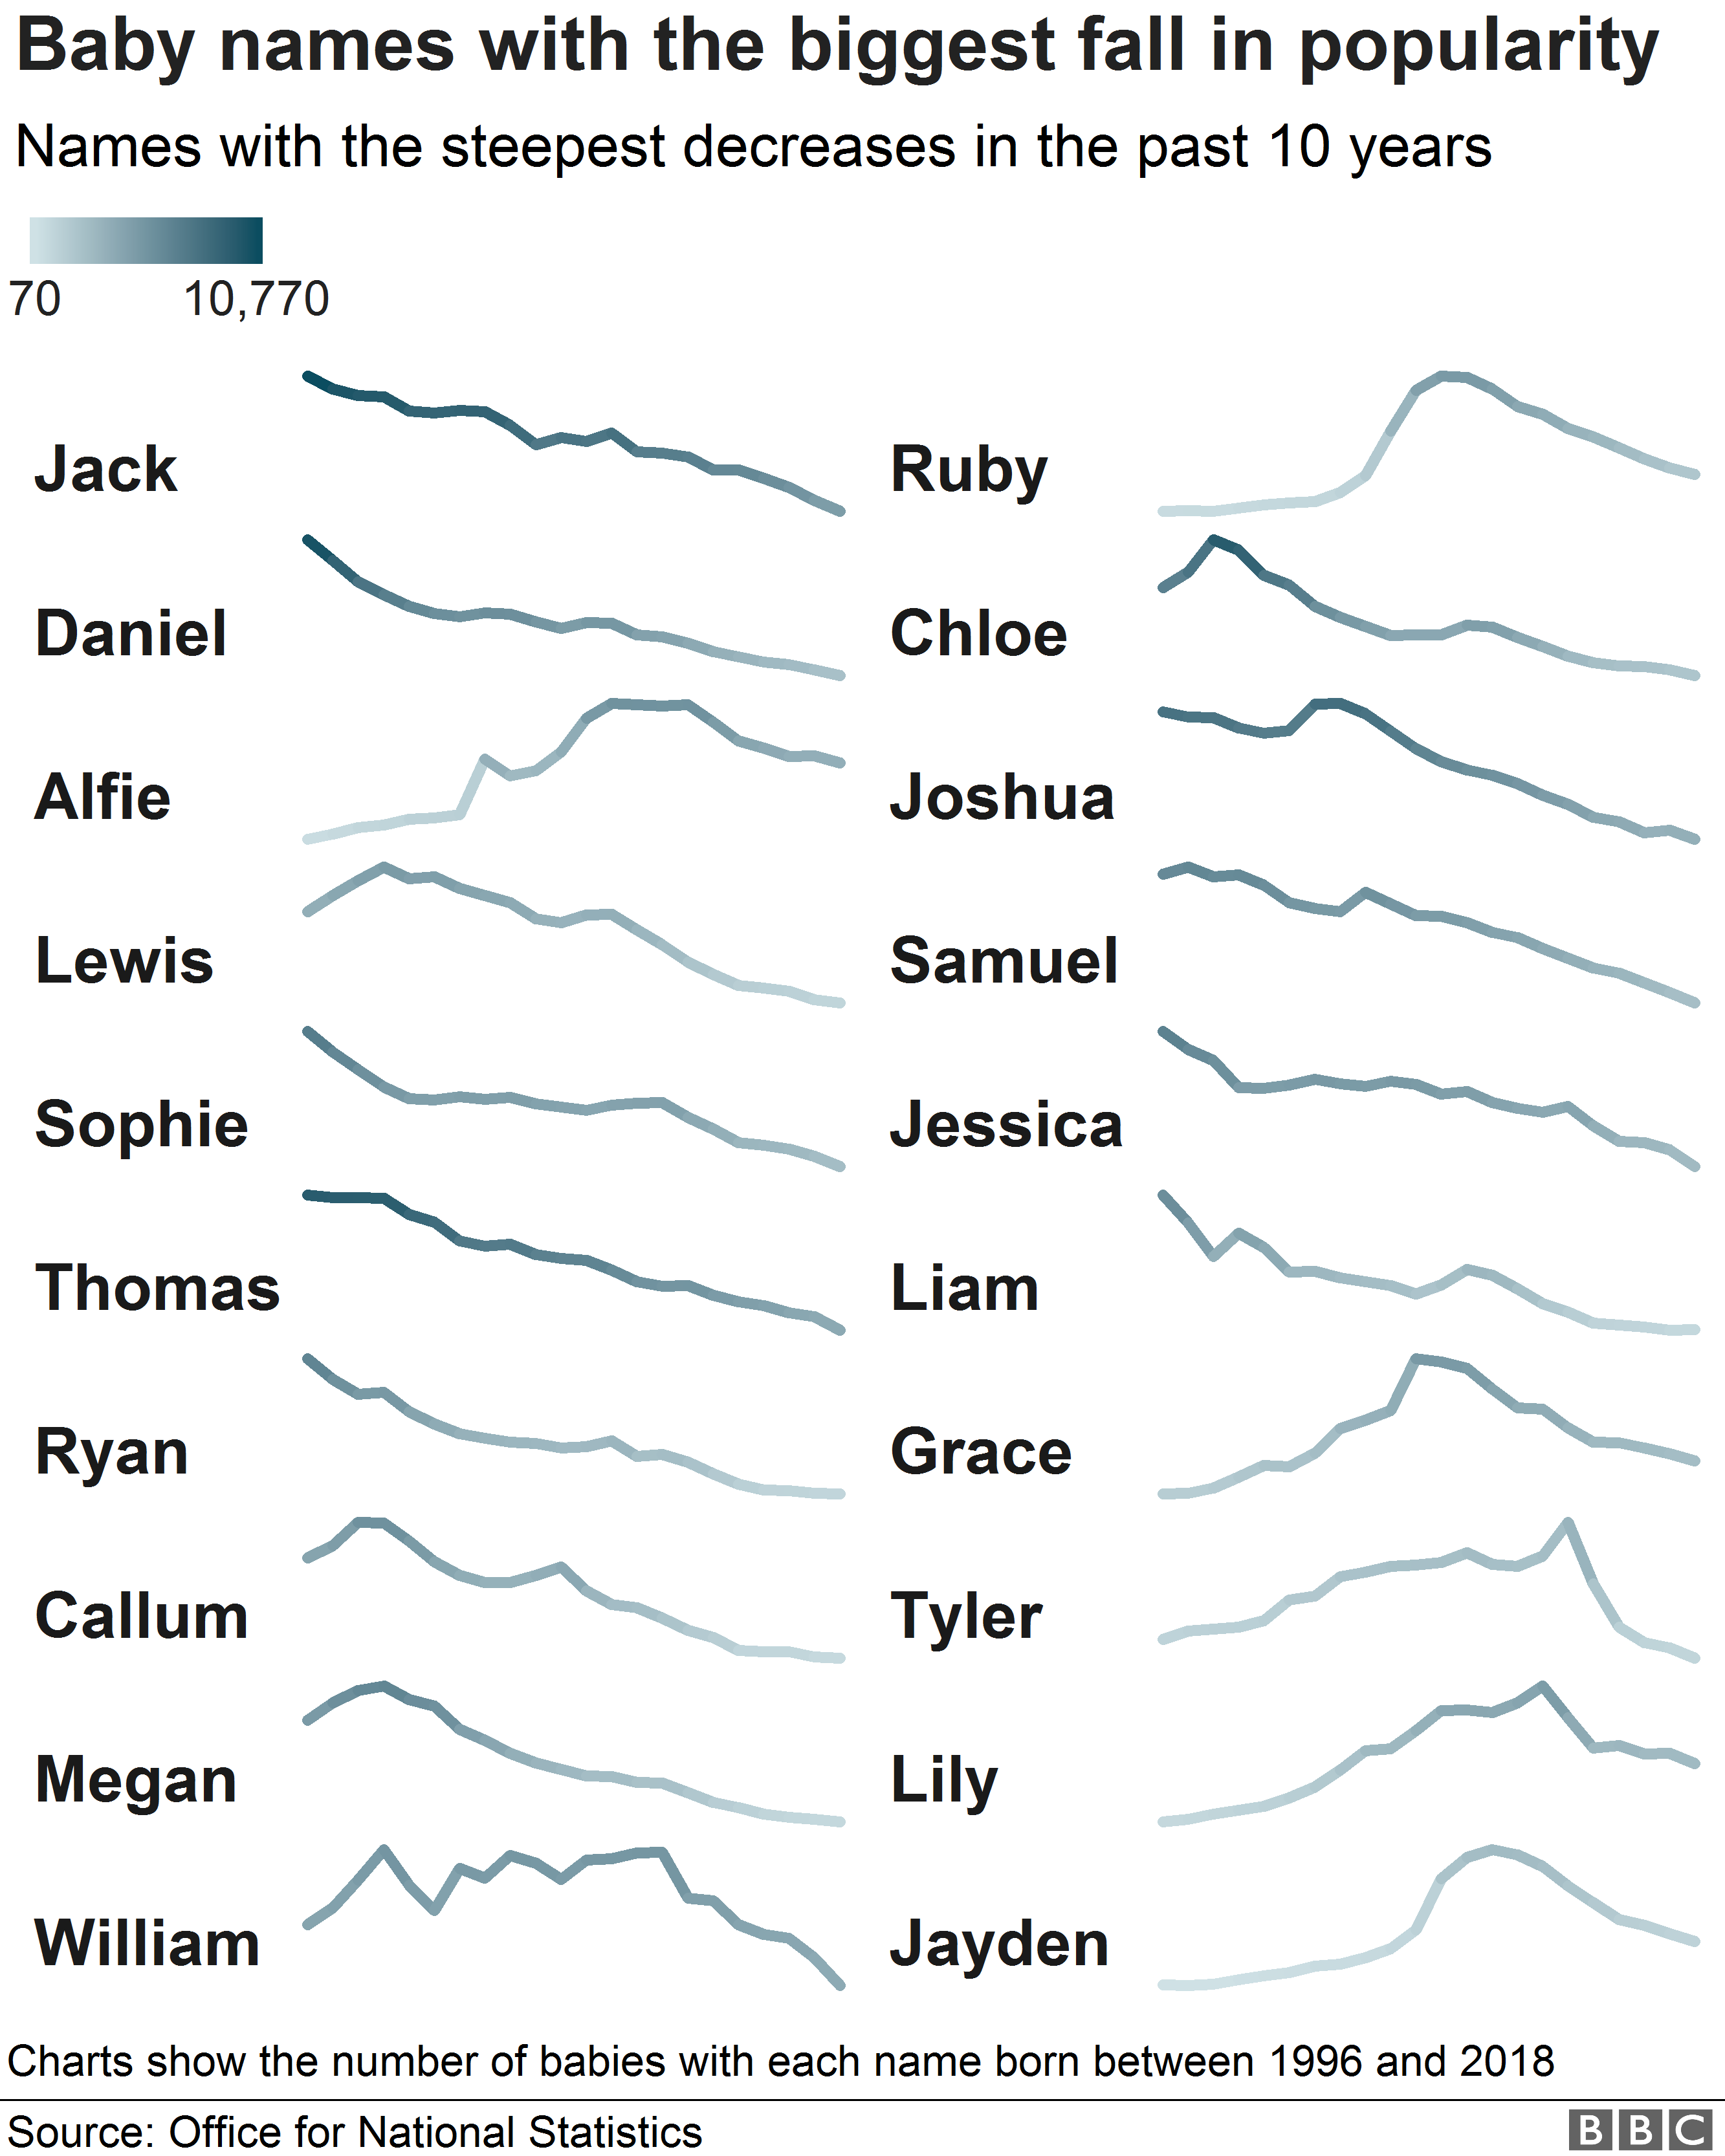 Chart showing decrease in popularity of baby names